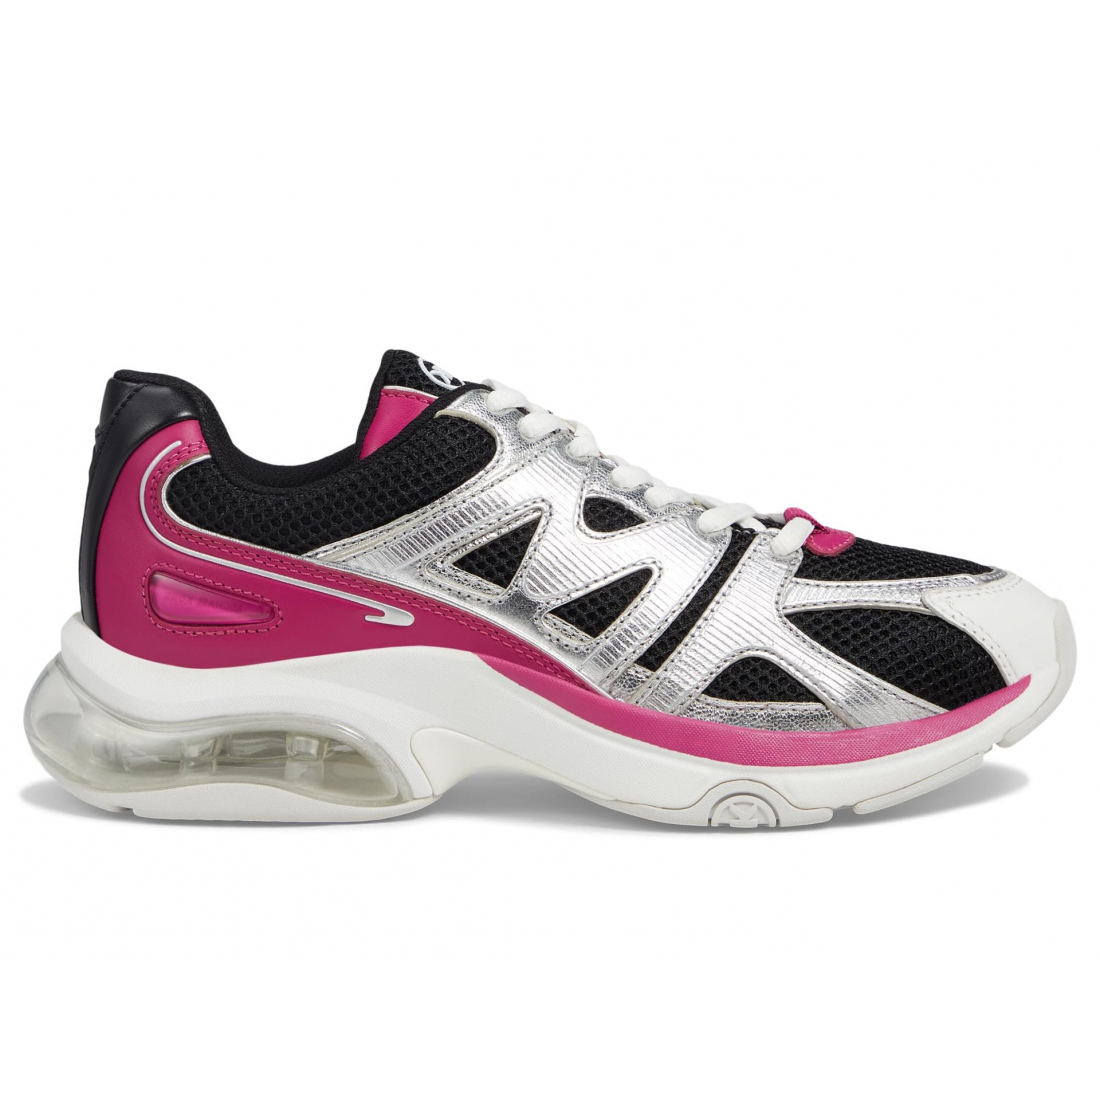 Women's 'Kit Trainer Extreme' Sneakers